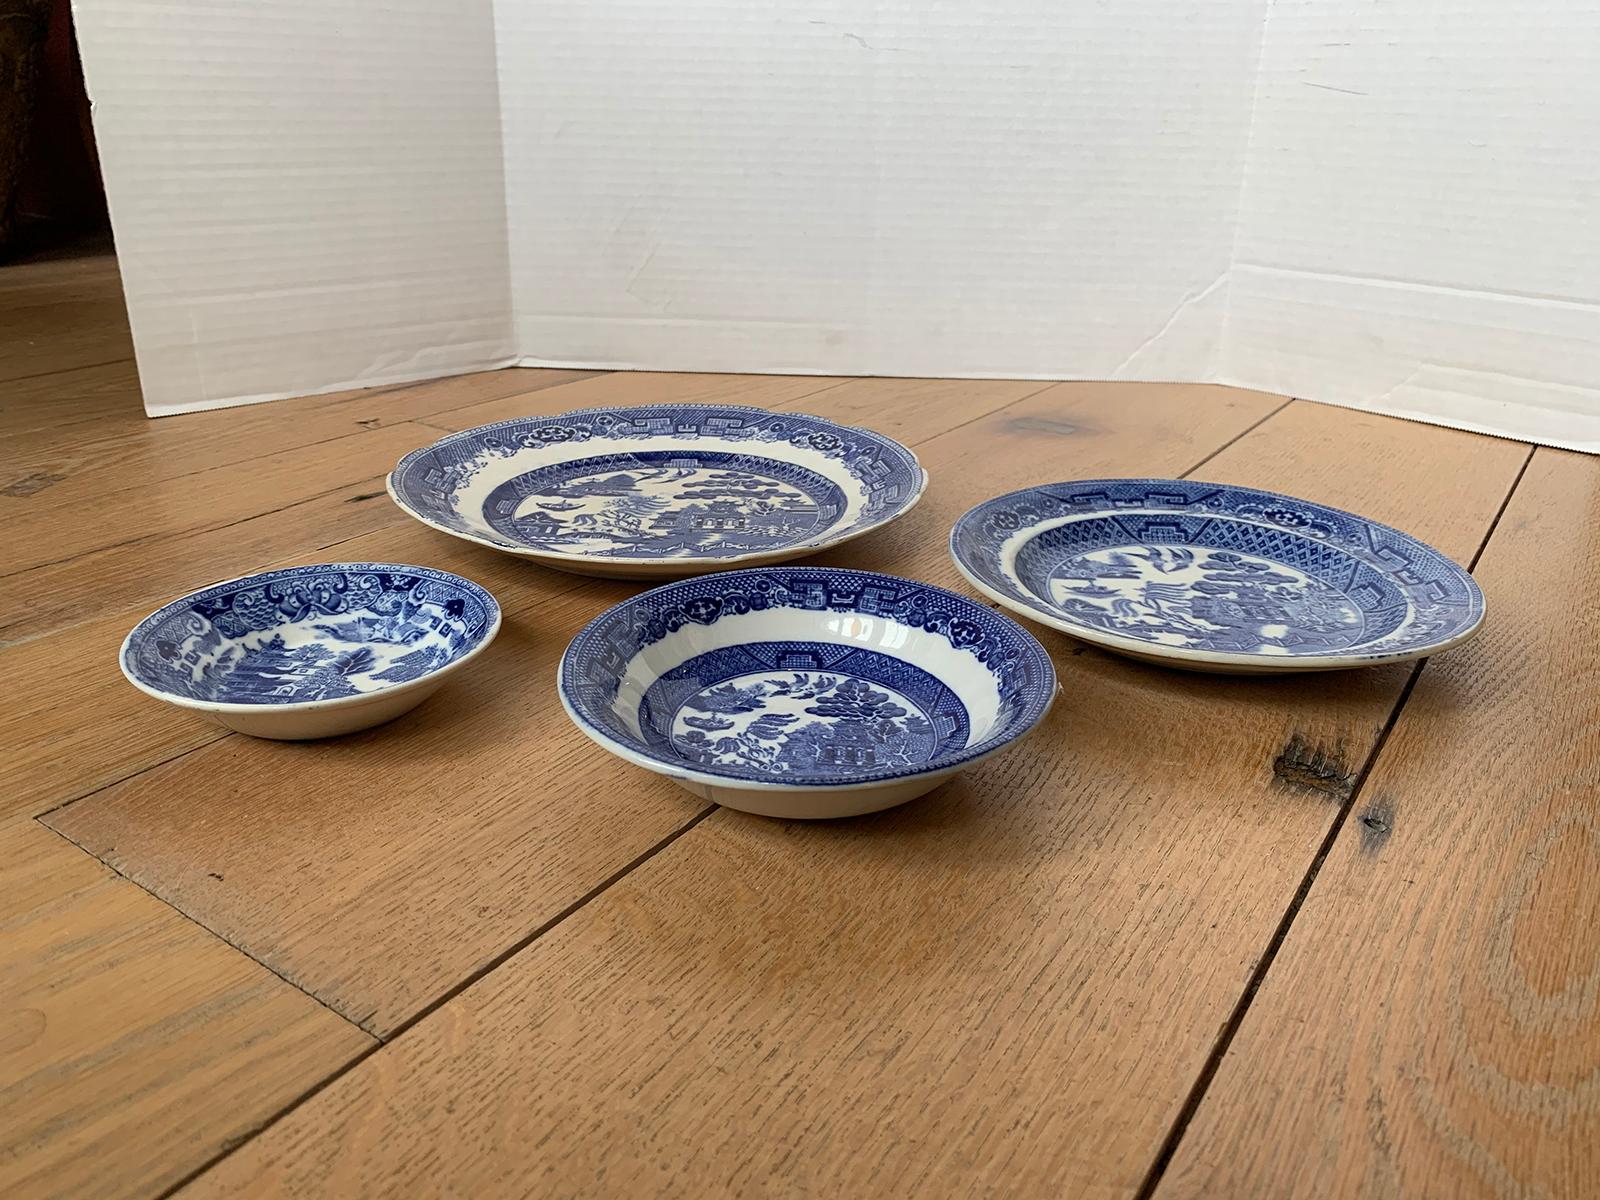 Assembled Set of Four 19th Century English Blue Willow Porcelain Plates 9